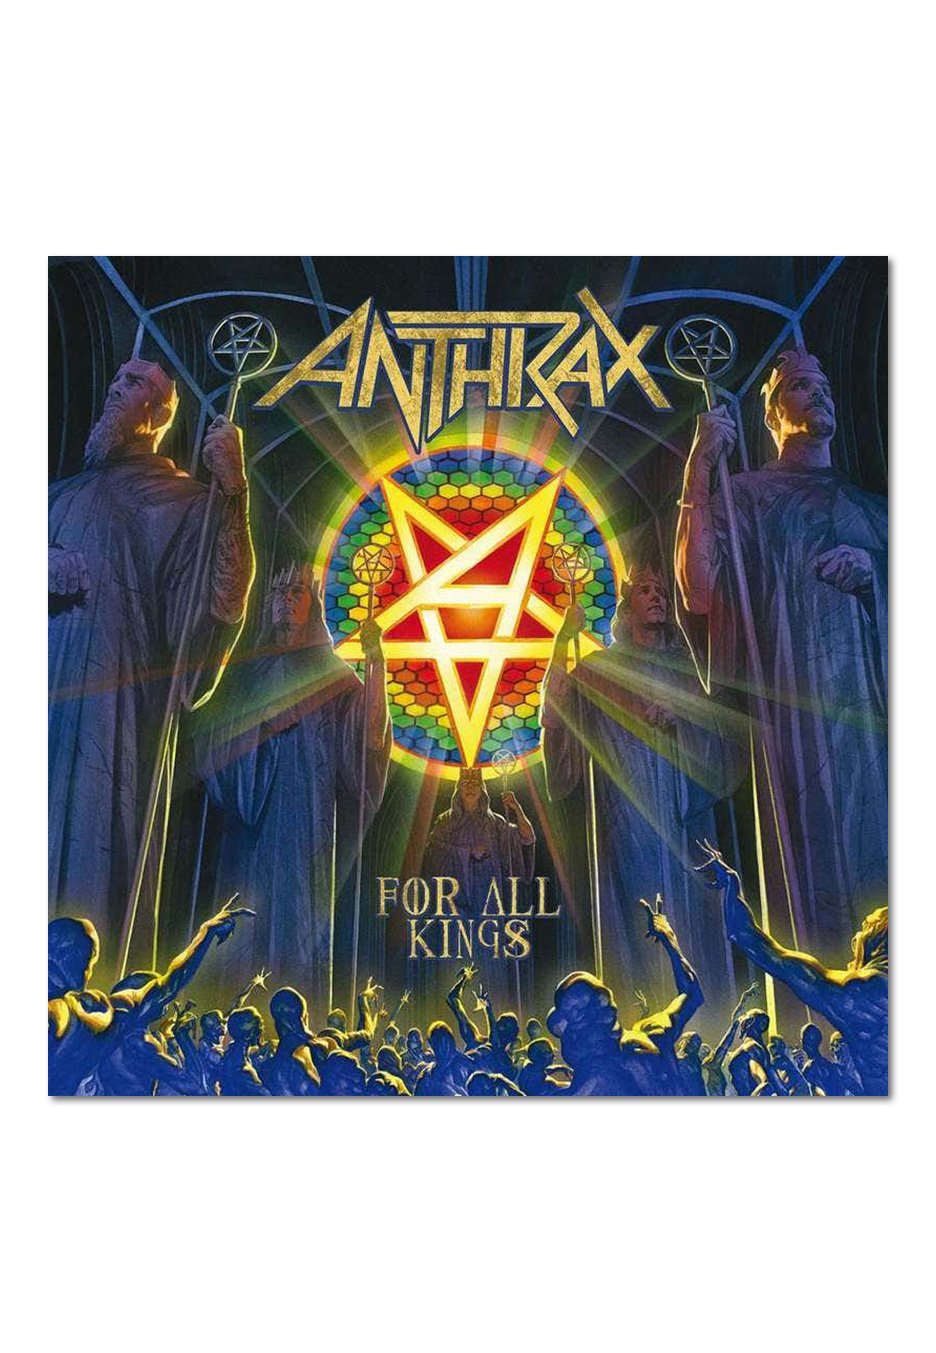 Anthrax - For All Kings - CD